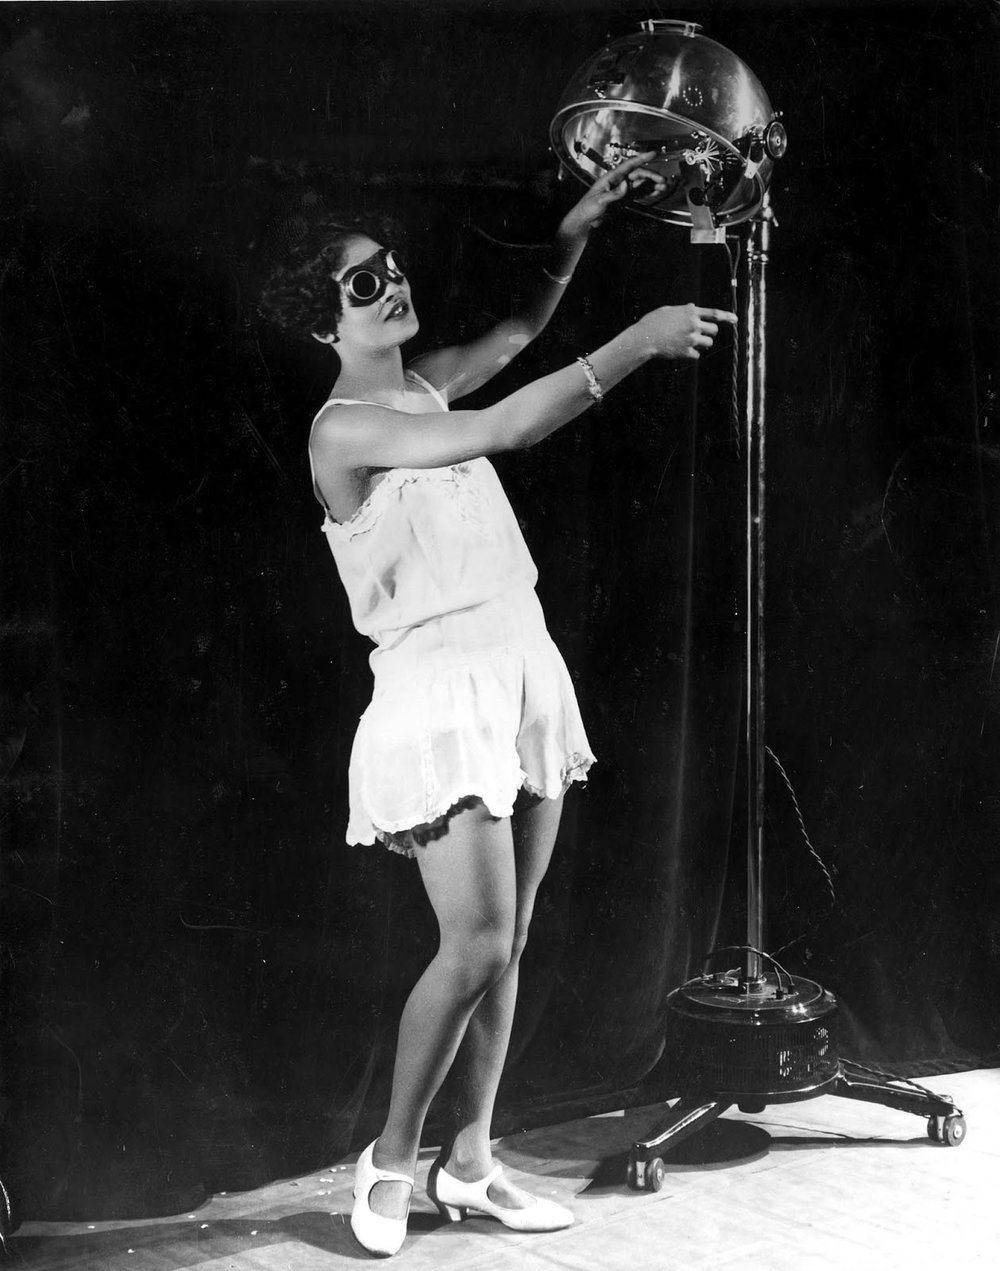  23 year old Alma Smith, the ‘cleverest soubrette’ of the cast of ‘Blackbirds’ at the London Pavilion, receiving her daily dose of ultra violet rays from a sun machine. 1929. 